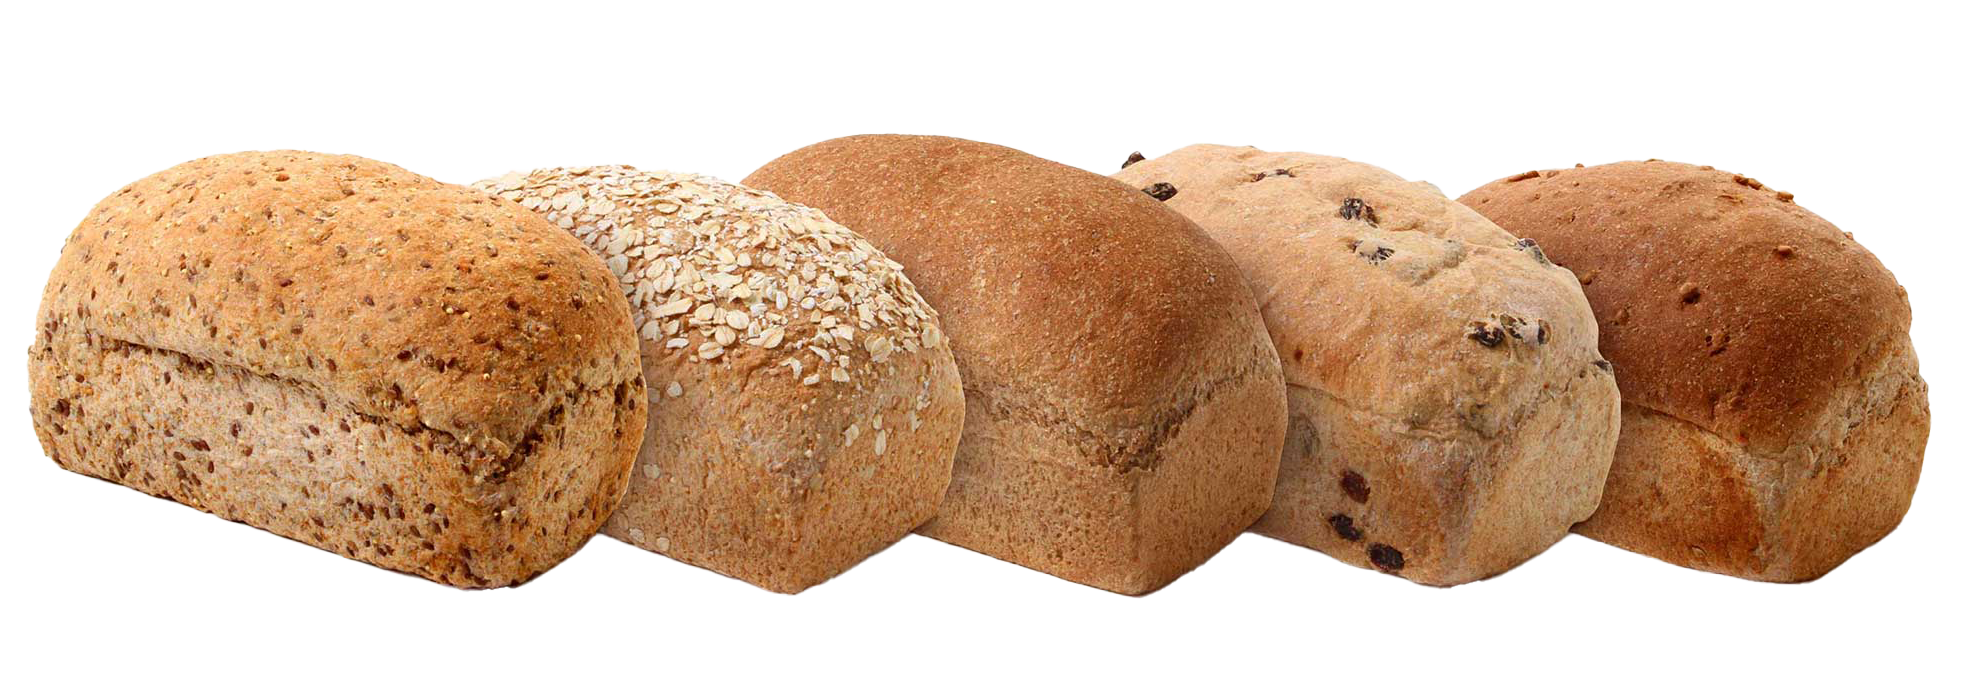 Great Harvest whole wheat bread.